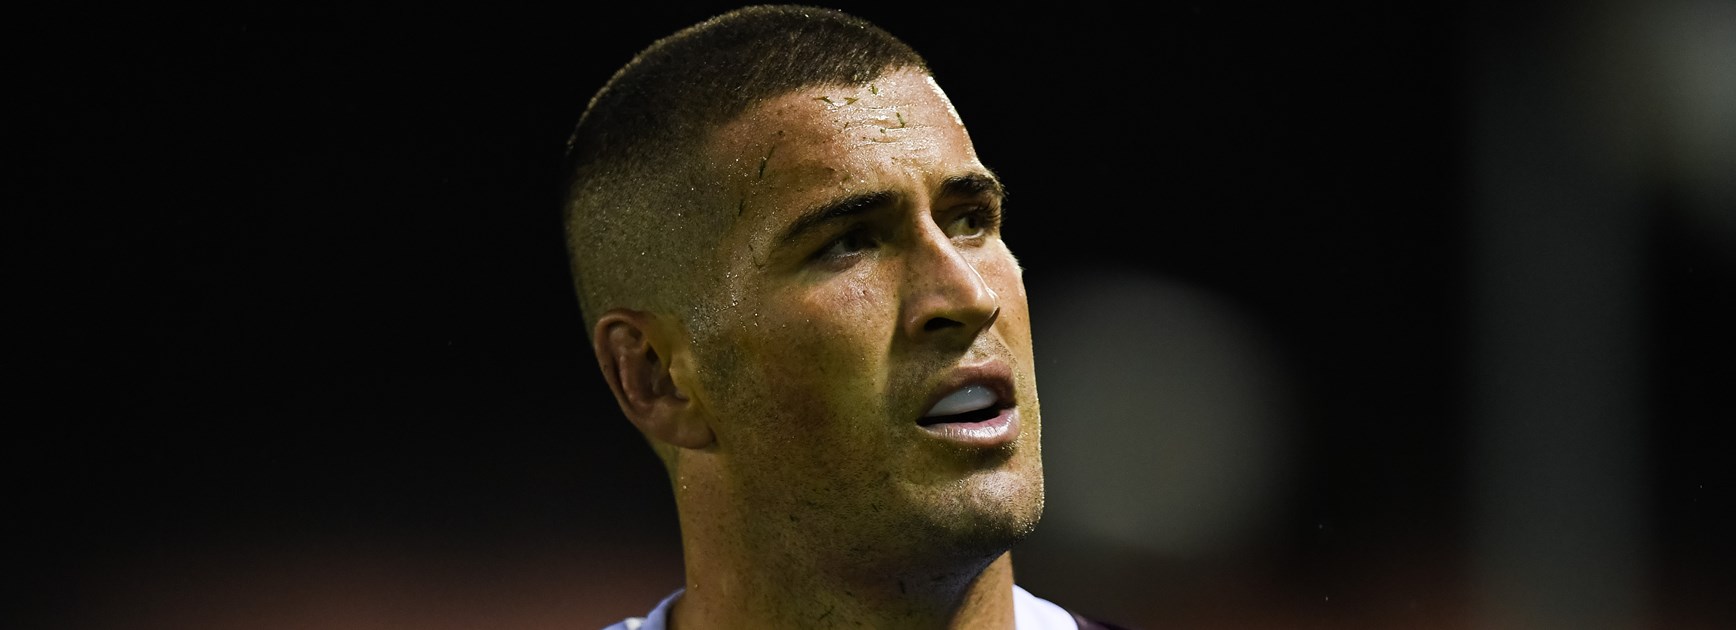 Joel Thompson seriously injured after 'real bad accident'